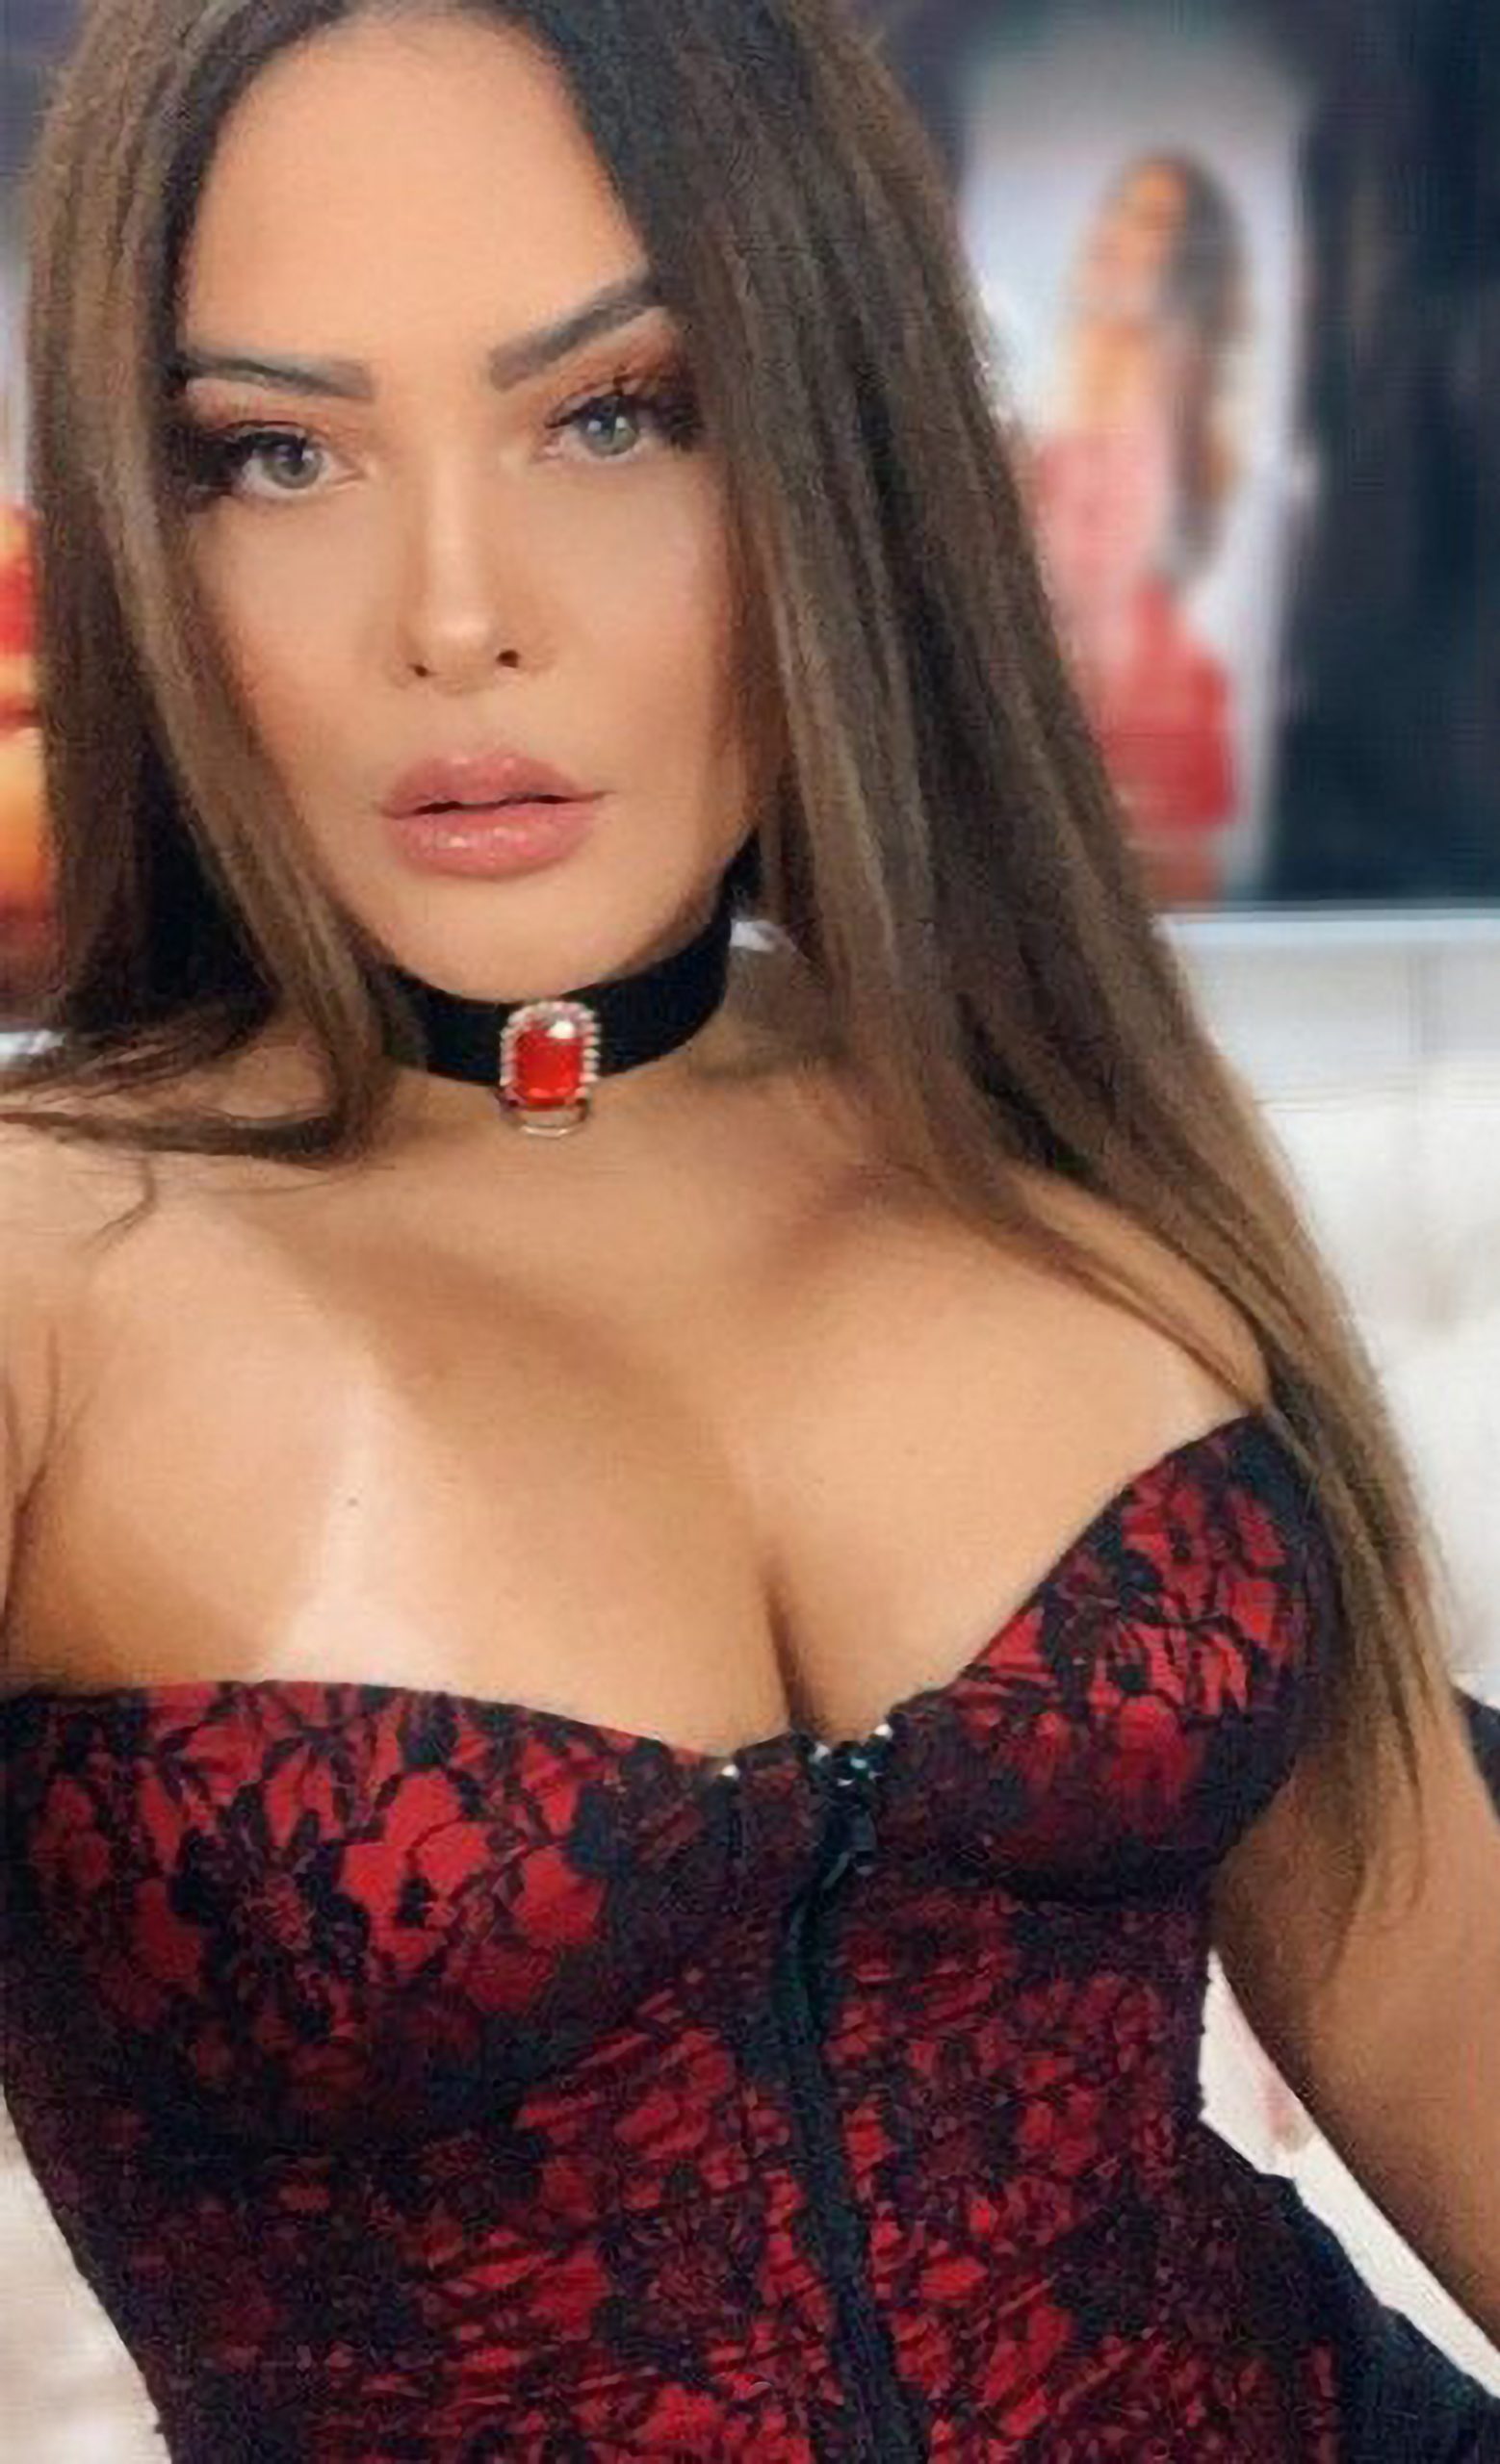 Read more about the article 5exy Brazilian Influencer Romps With 10 Men At Swingers Club